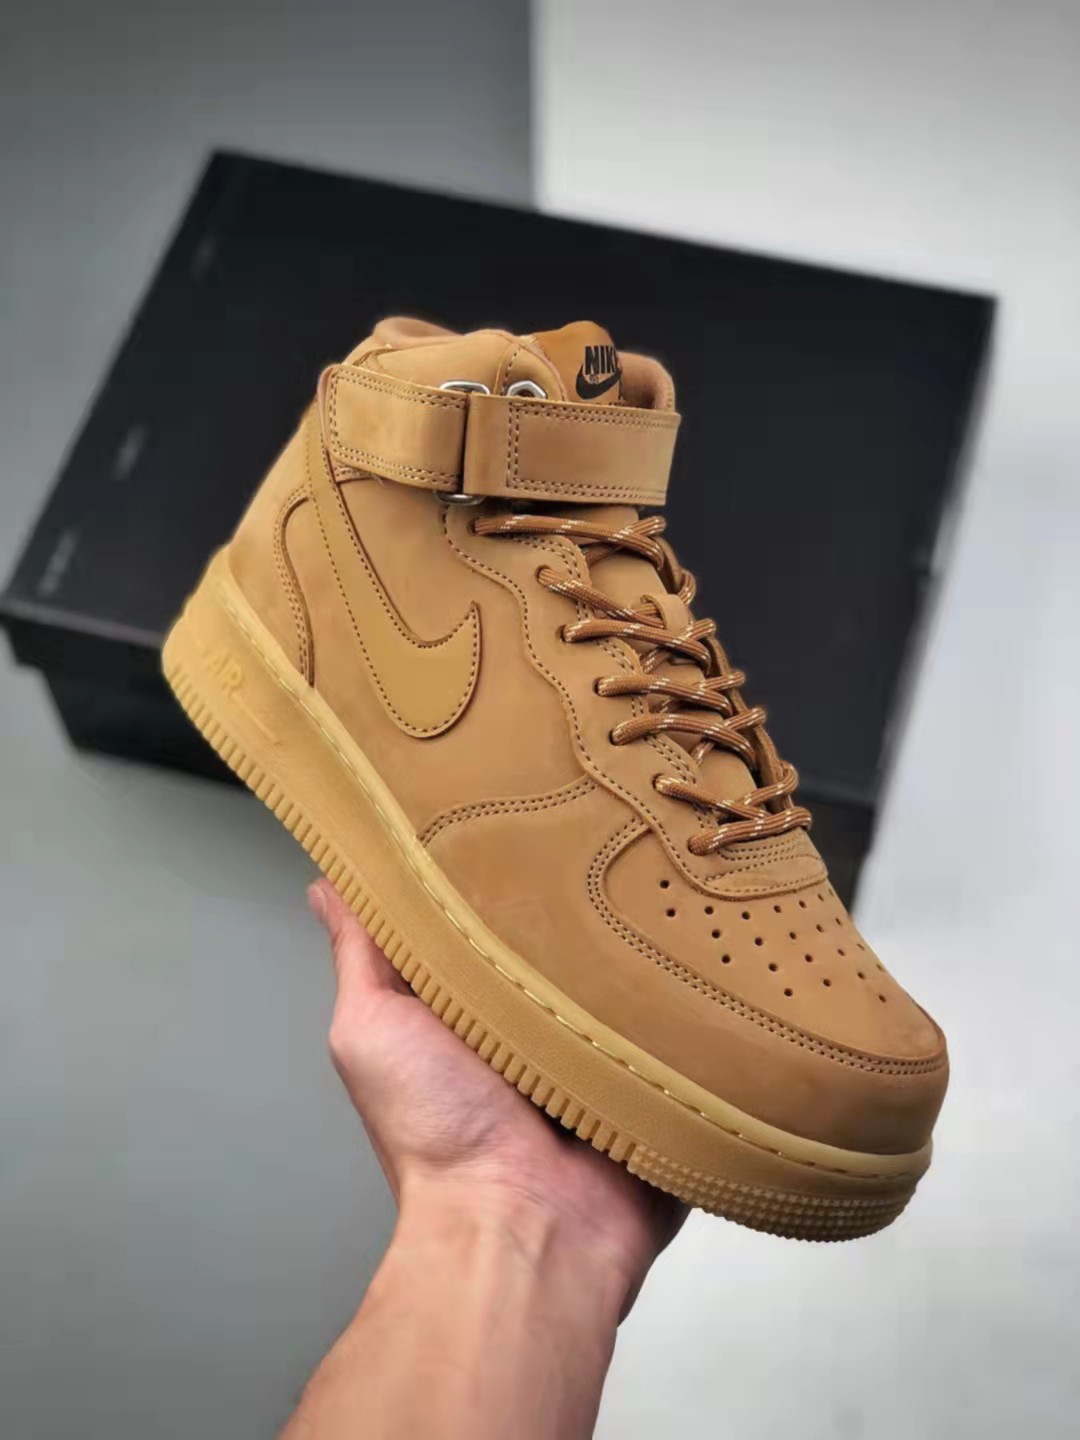 Nike Air Force 1 Mid '07 'Flax' DJ9158-200 - Stylish & Iconic Sneakers